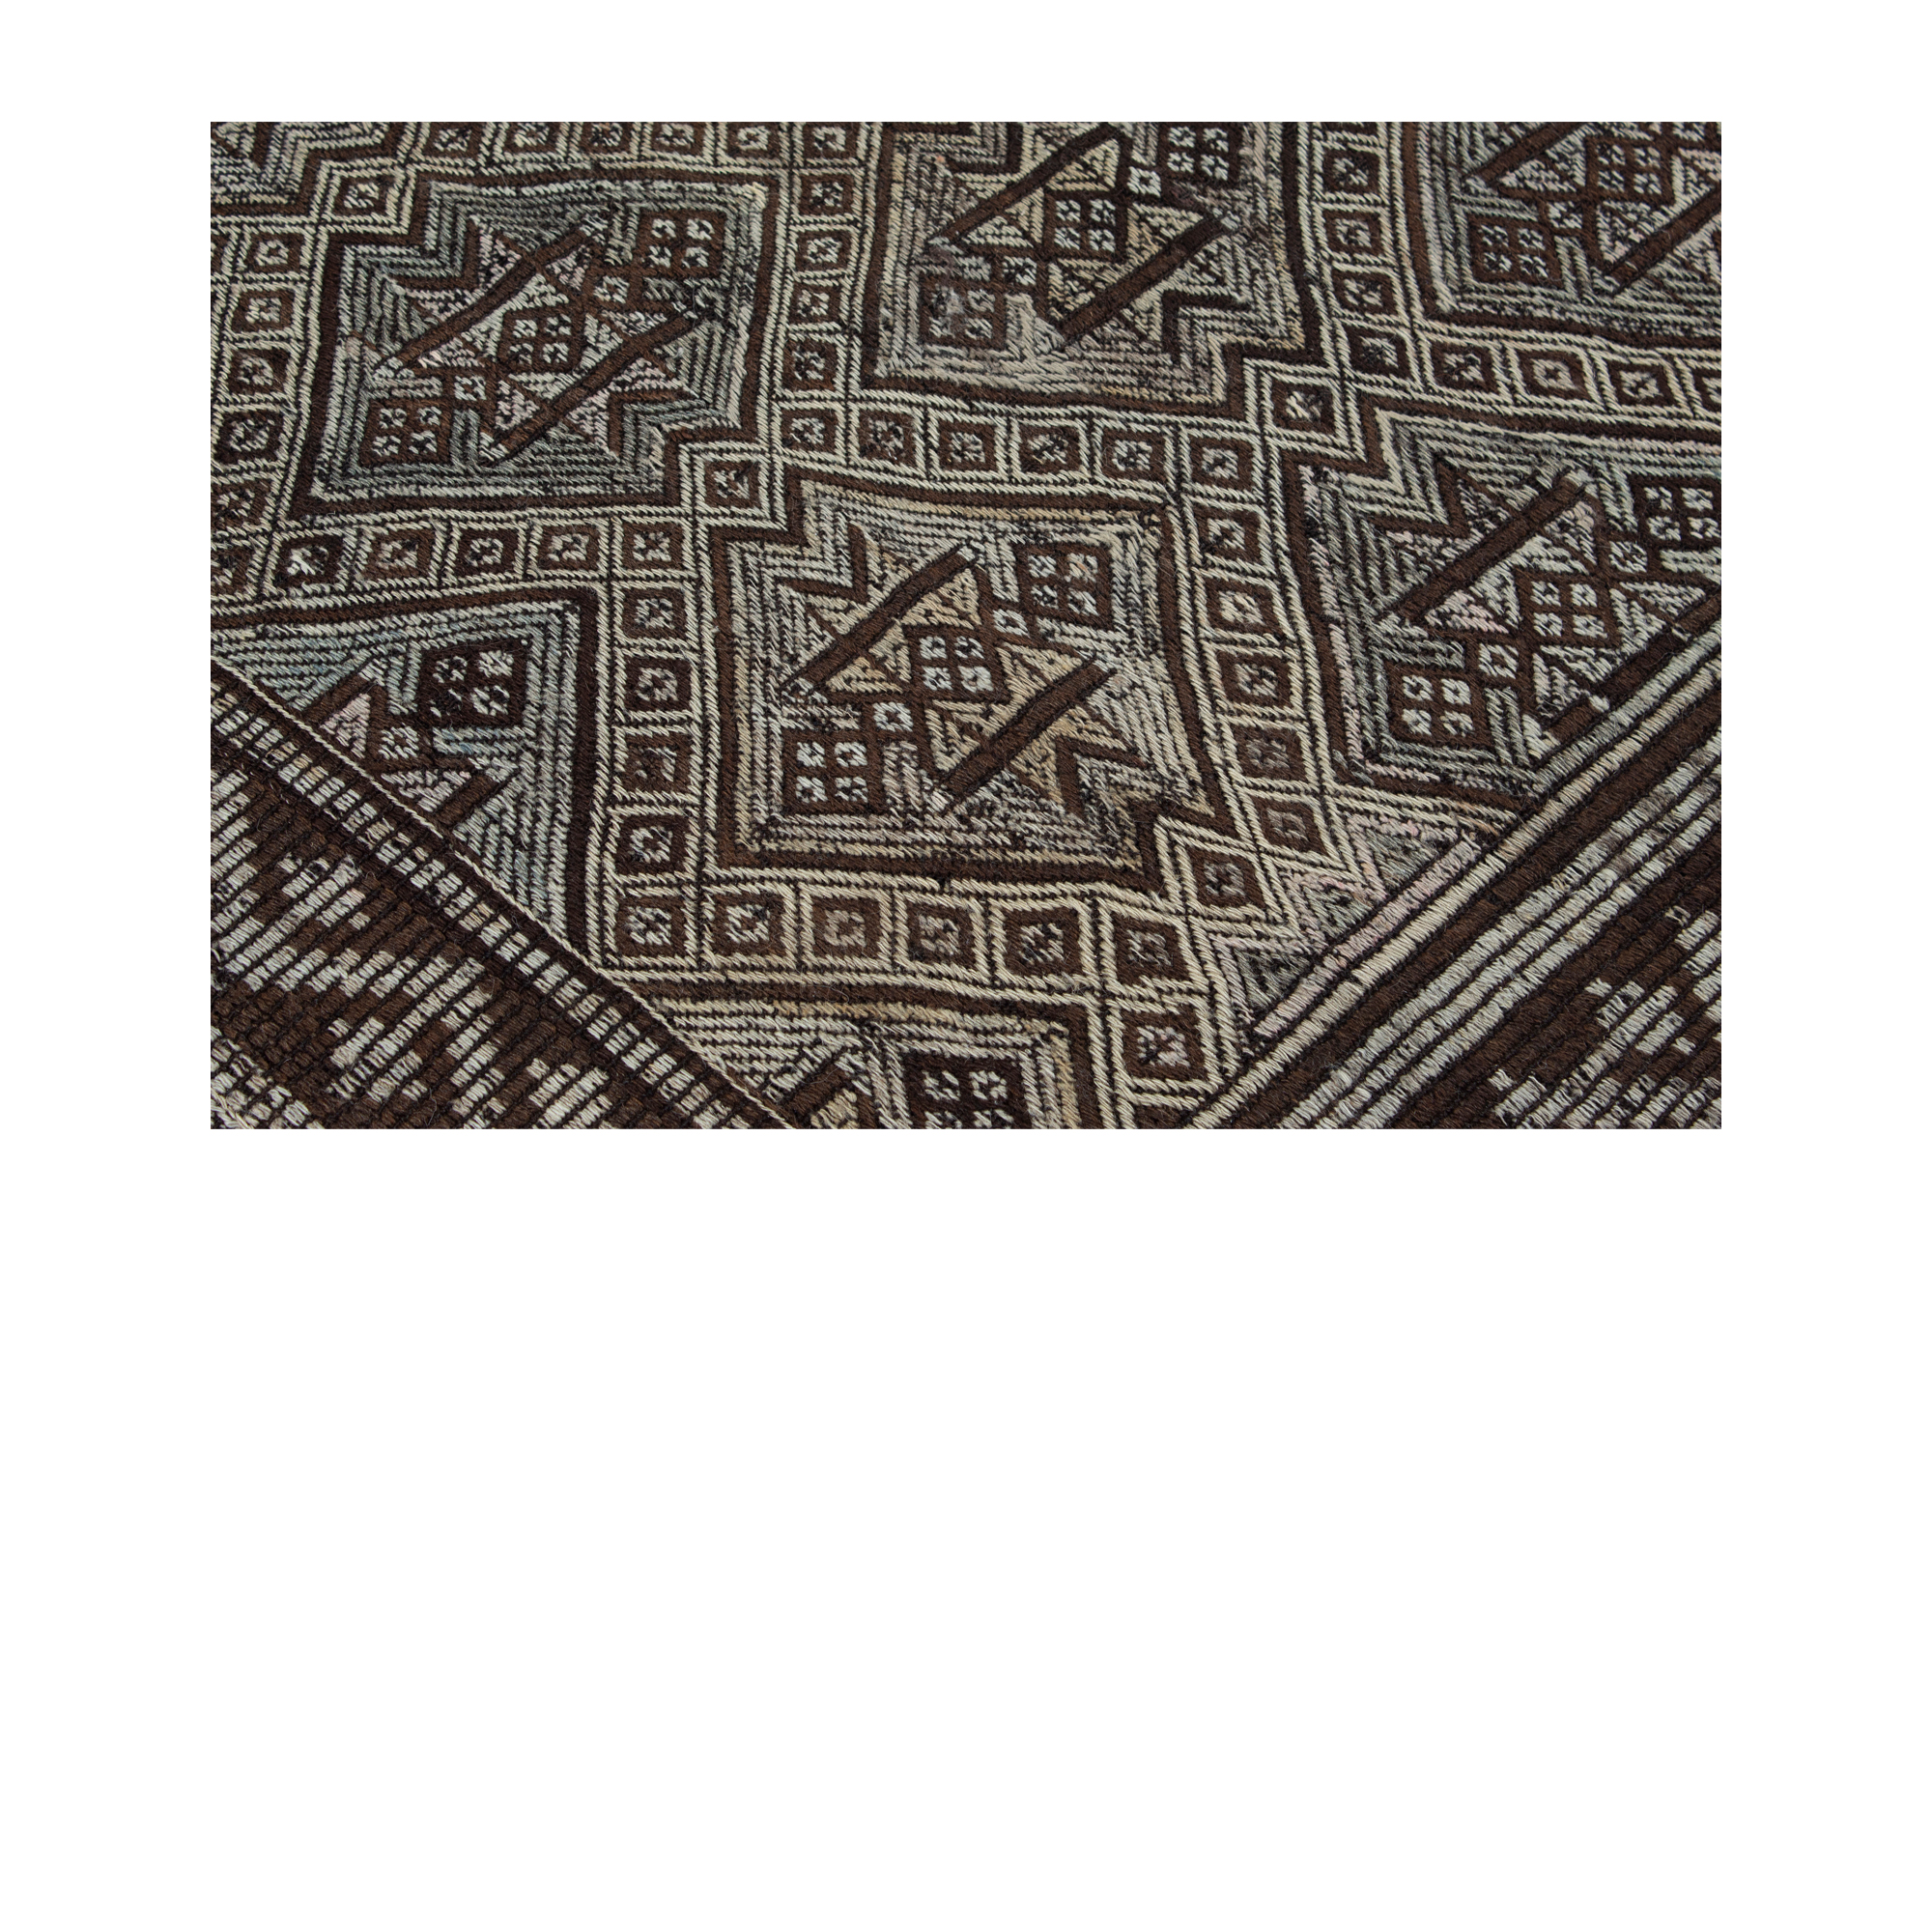 This Vintage Zeillu Flatweave rug is hand-woven and made of 100% wool. 